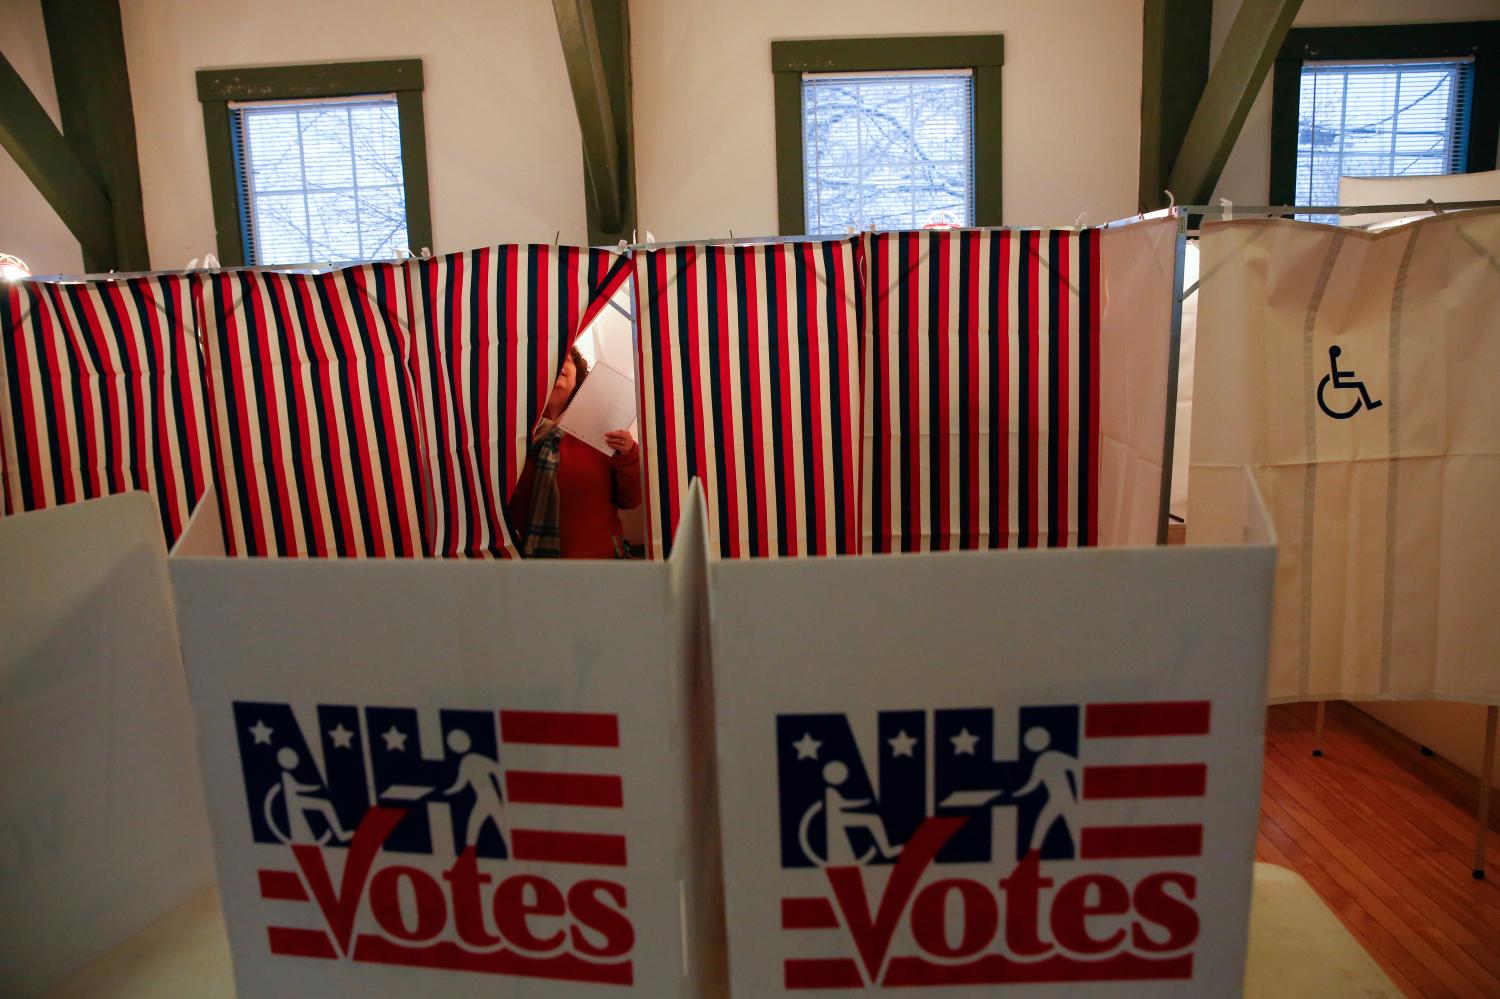 A woman leaves a voting station in a polling place at the Canterbury Town Hall polling station in Canterbury, New Hampshire February 9, 2016. REUTERS/Shannon Stapleton - D1BESMAVHBAB